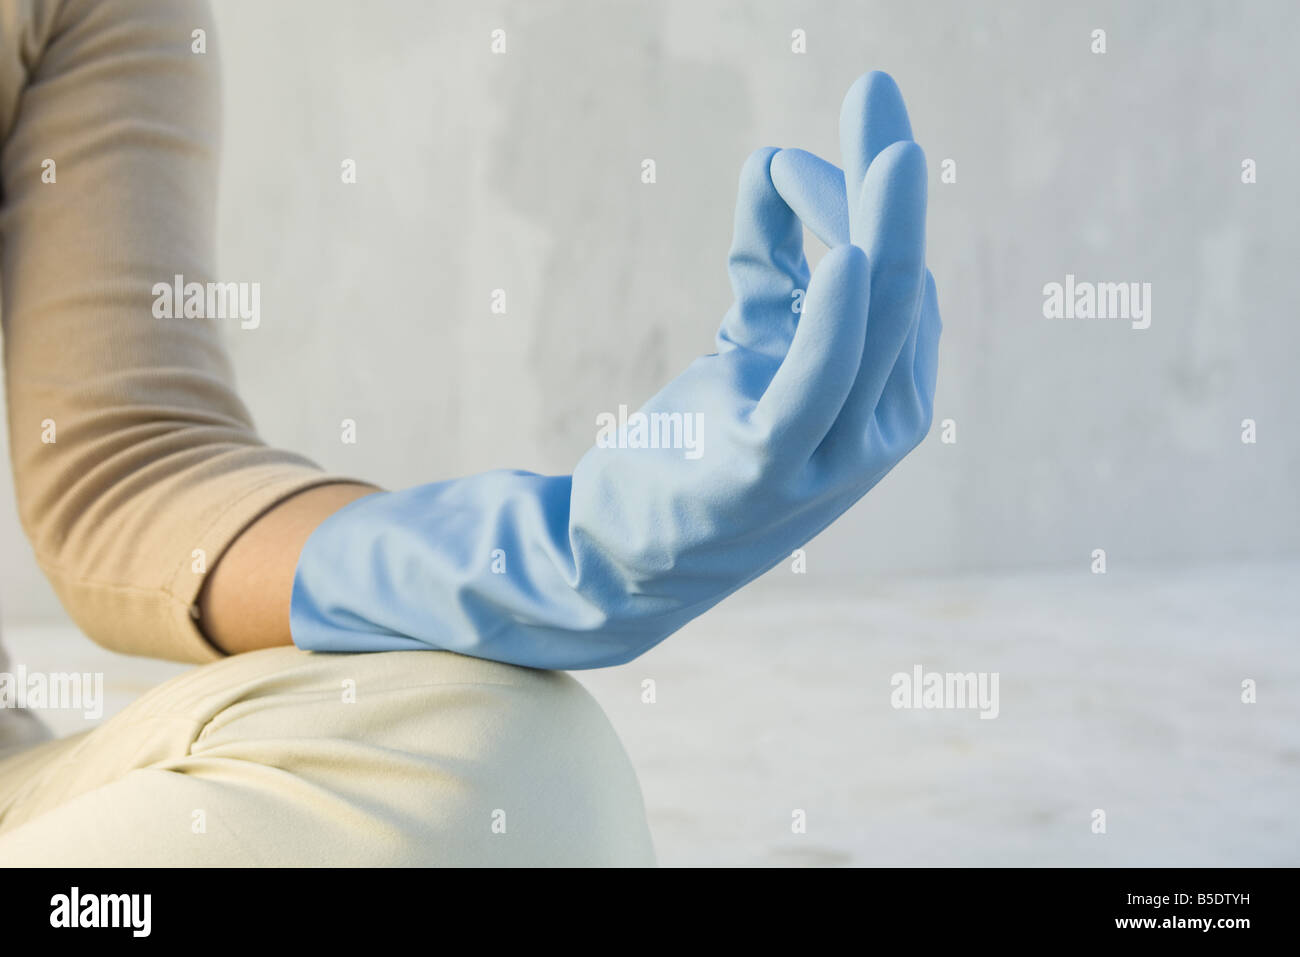 Person meditating with hand in mudra position, wearing rubber glove, cropped view Stock Photo